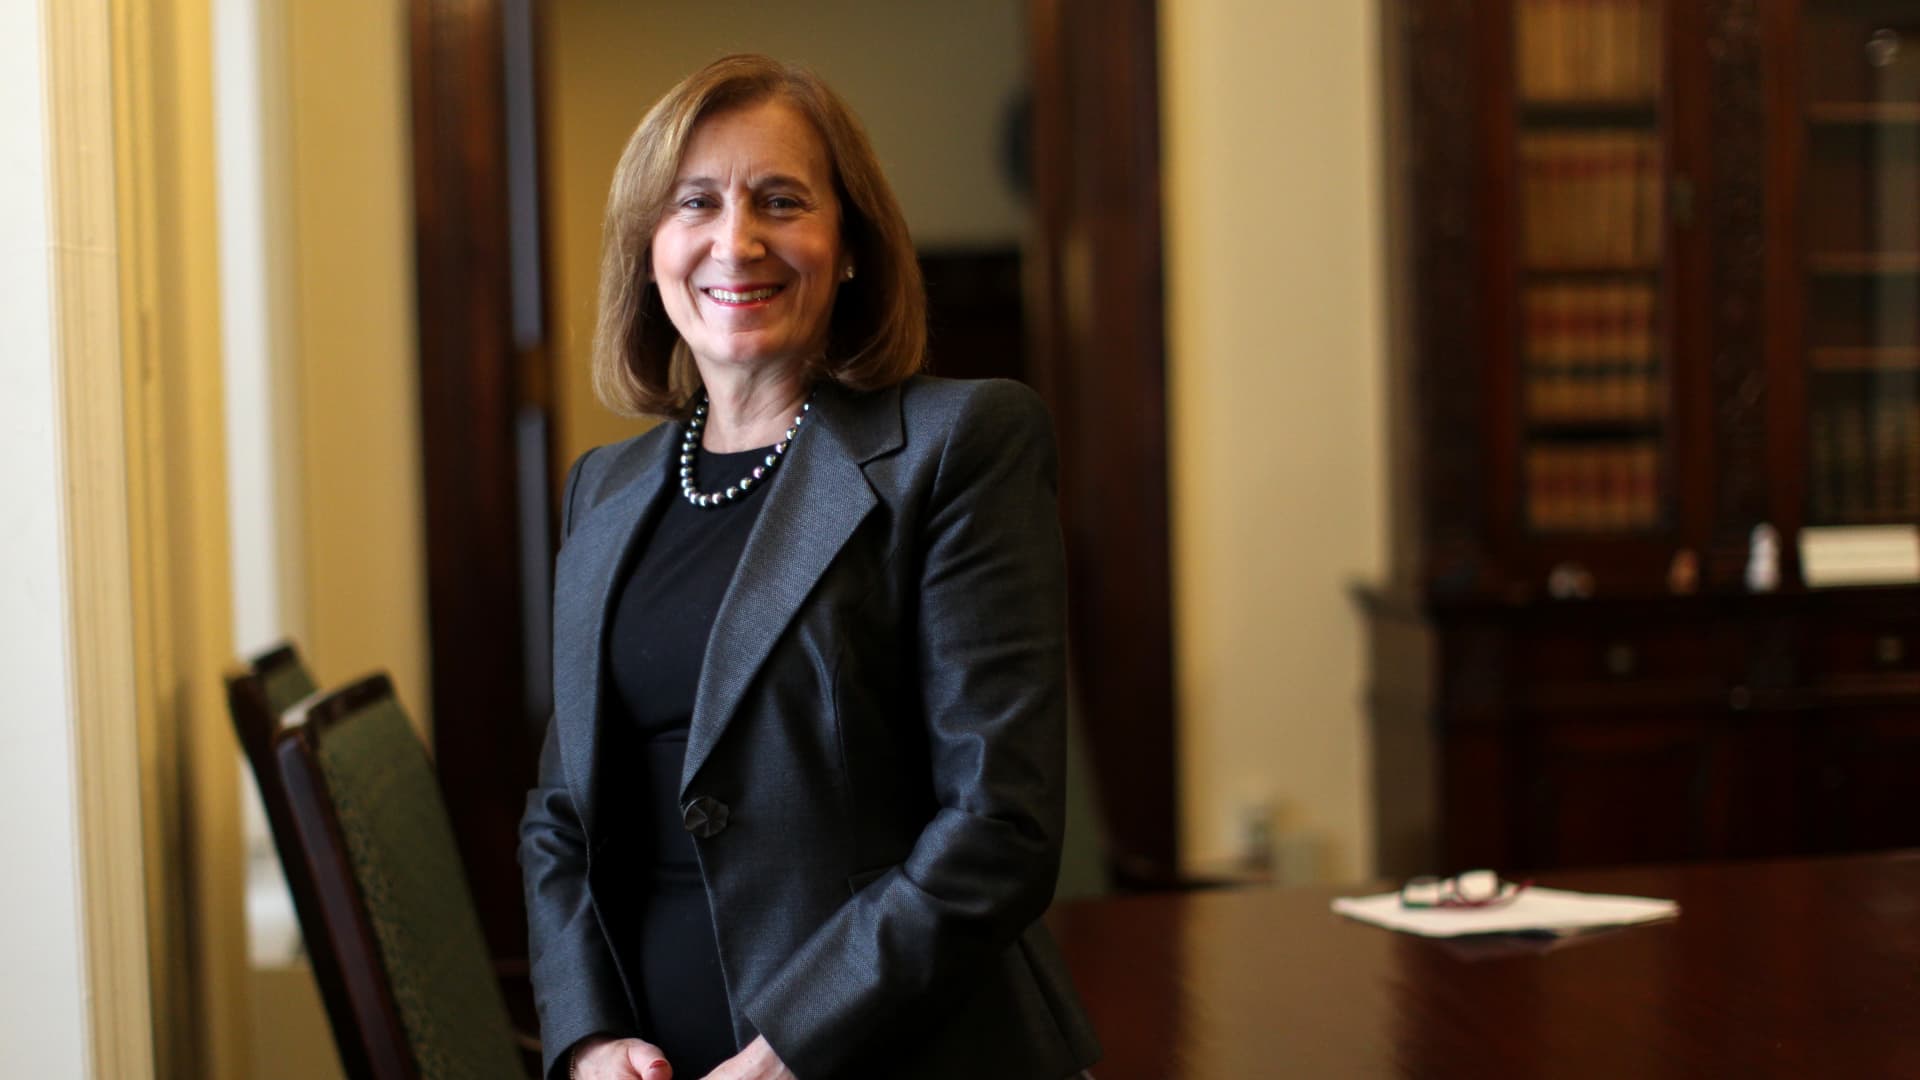 Profile of new State Treasurer Deb Goldberg, who next week will chair her first PRIM state pension fund board meeting as its chair. Goldberg in her State House office.